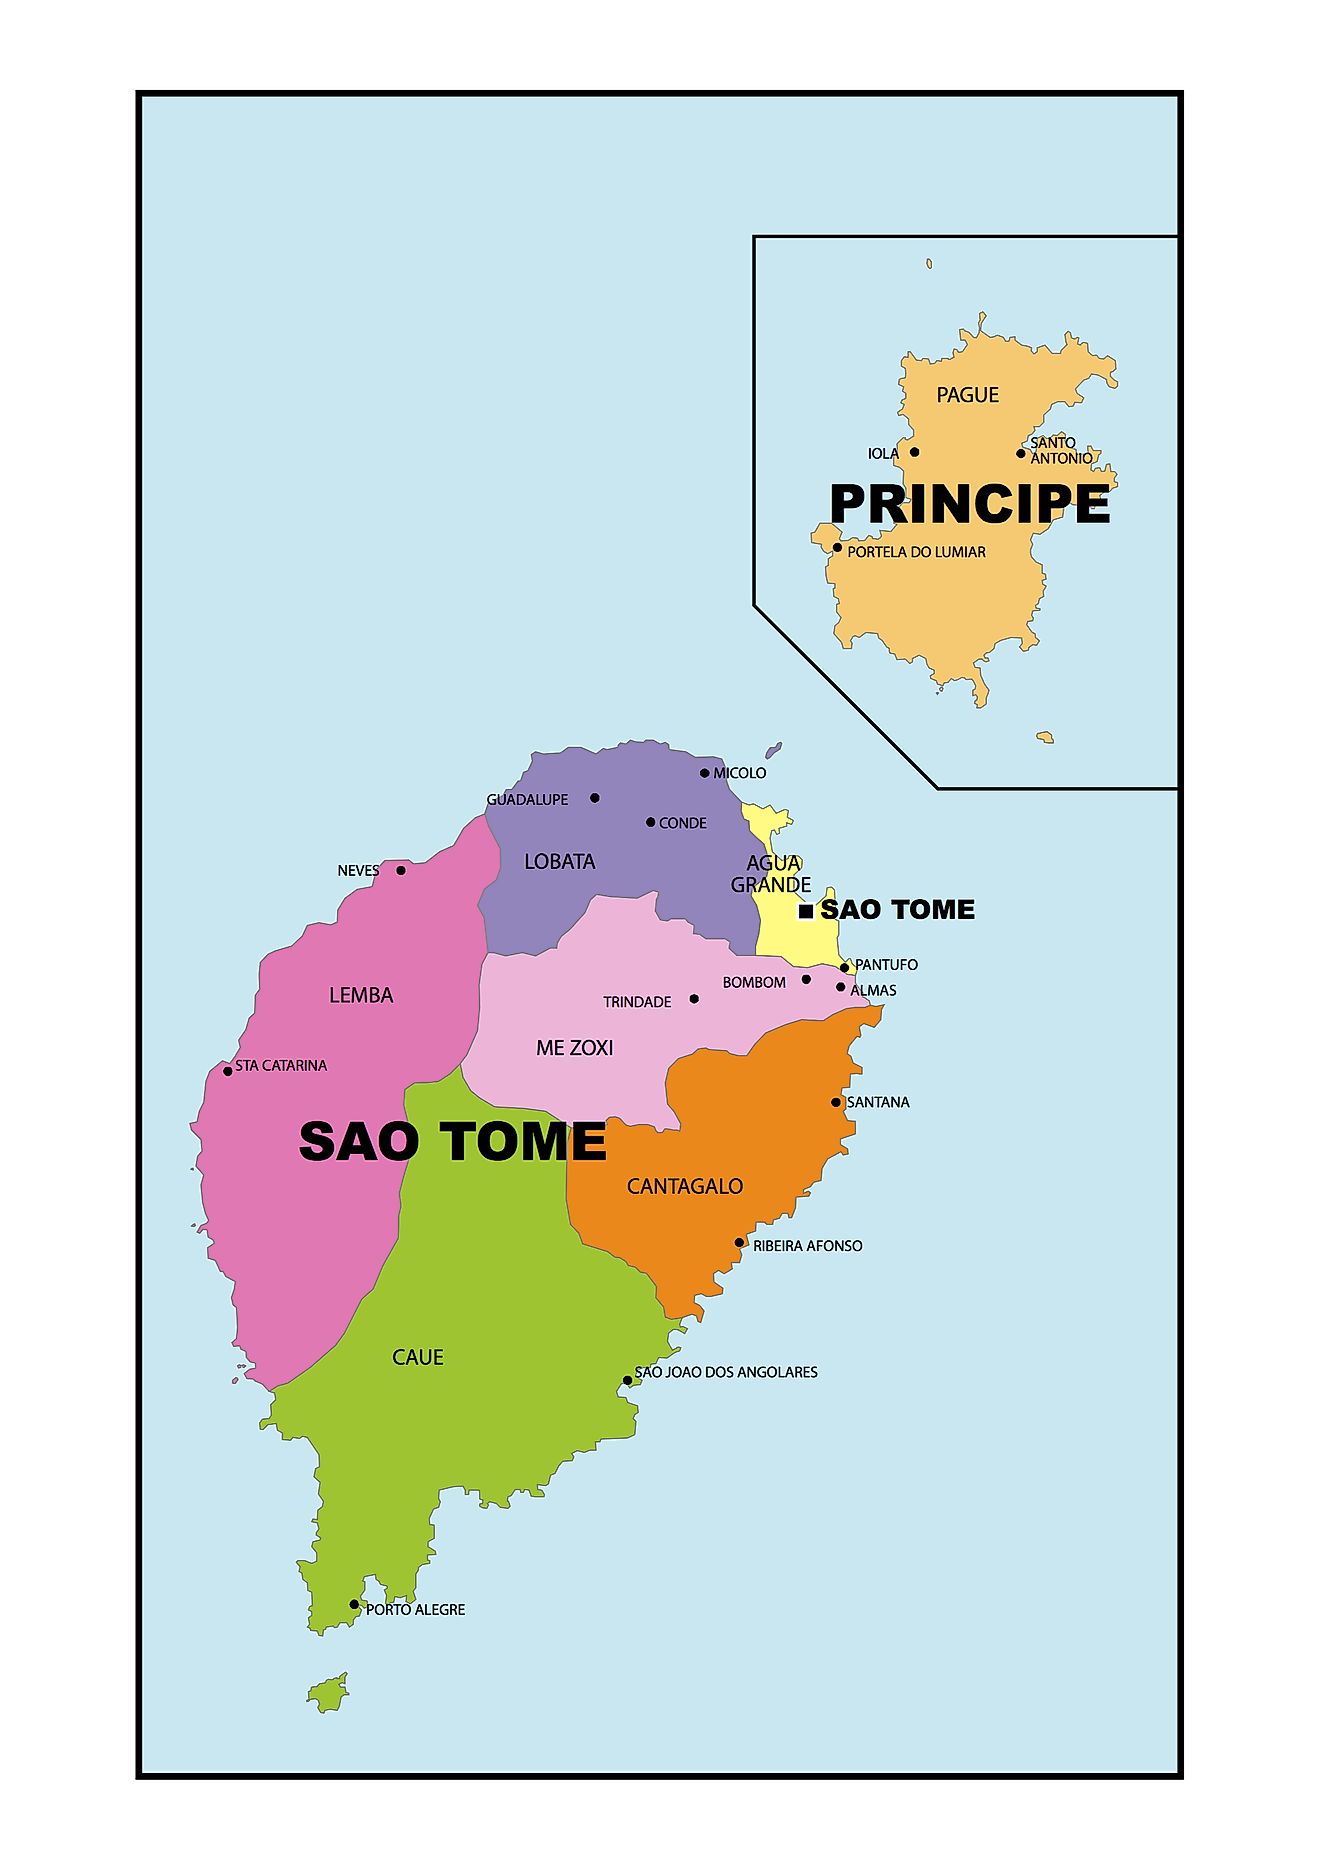 Political Map of São Tomé and Príncipe showing its six districts, their capitals, and the national capital of São Tomé.